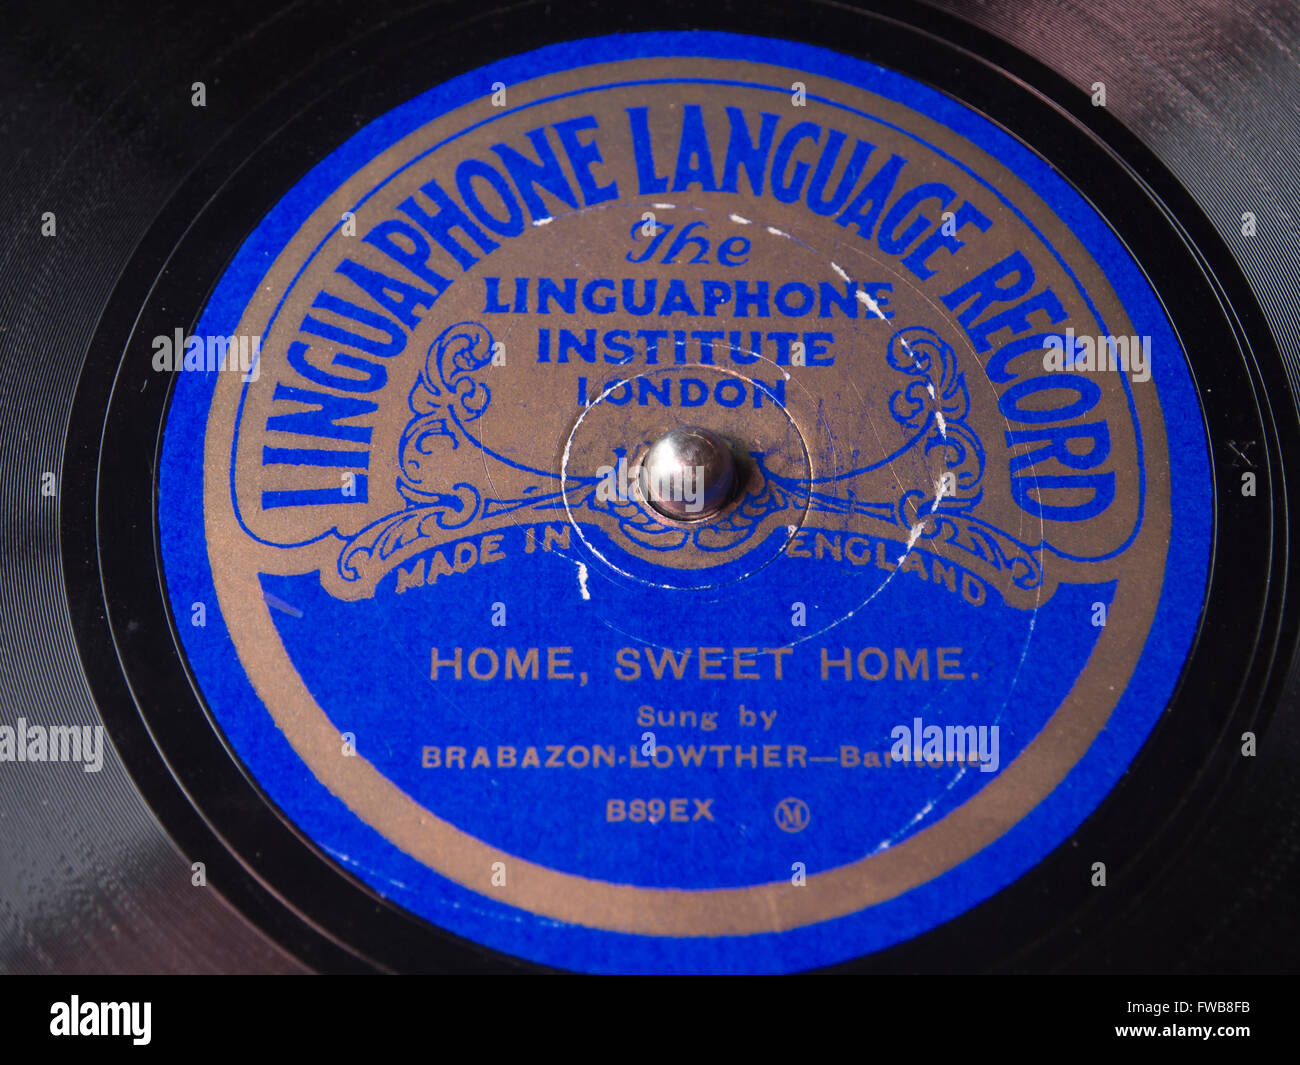 Linguaphone record language course, English songs, old shellac record 'Home sweet home' Brabazon Lowther baritone close up Stock Photo